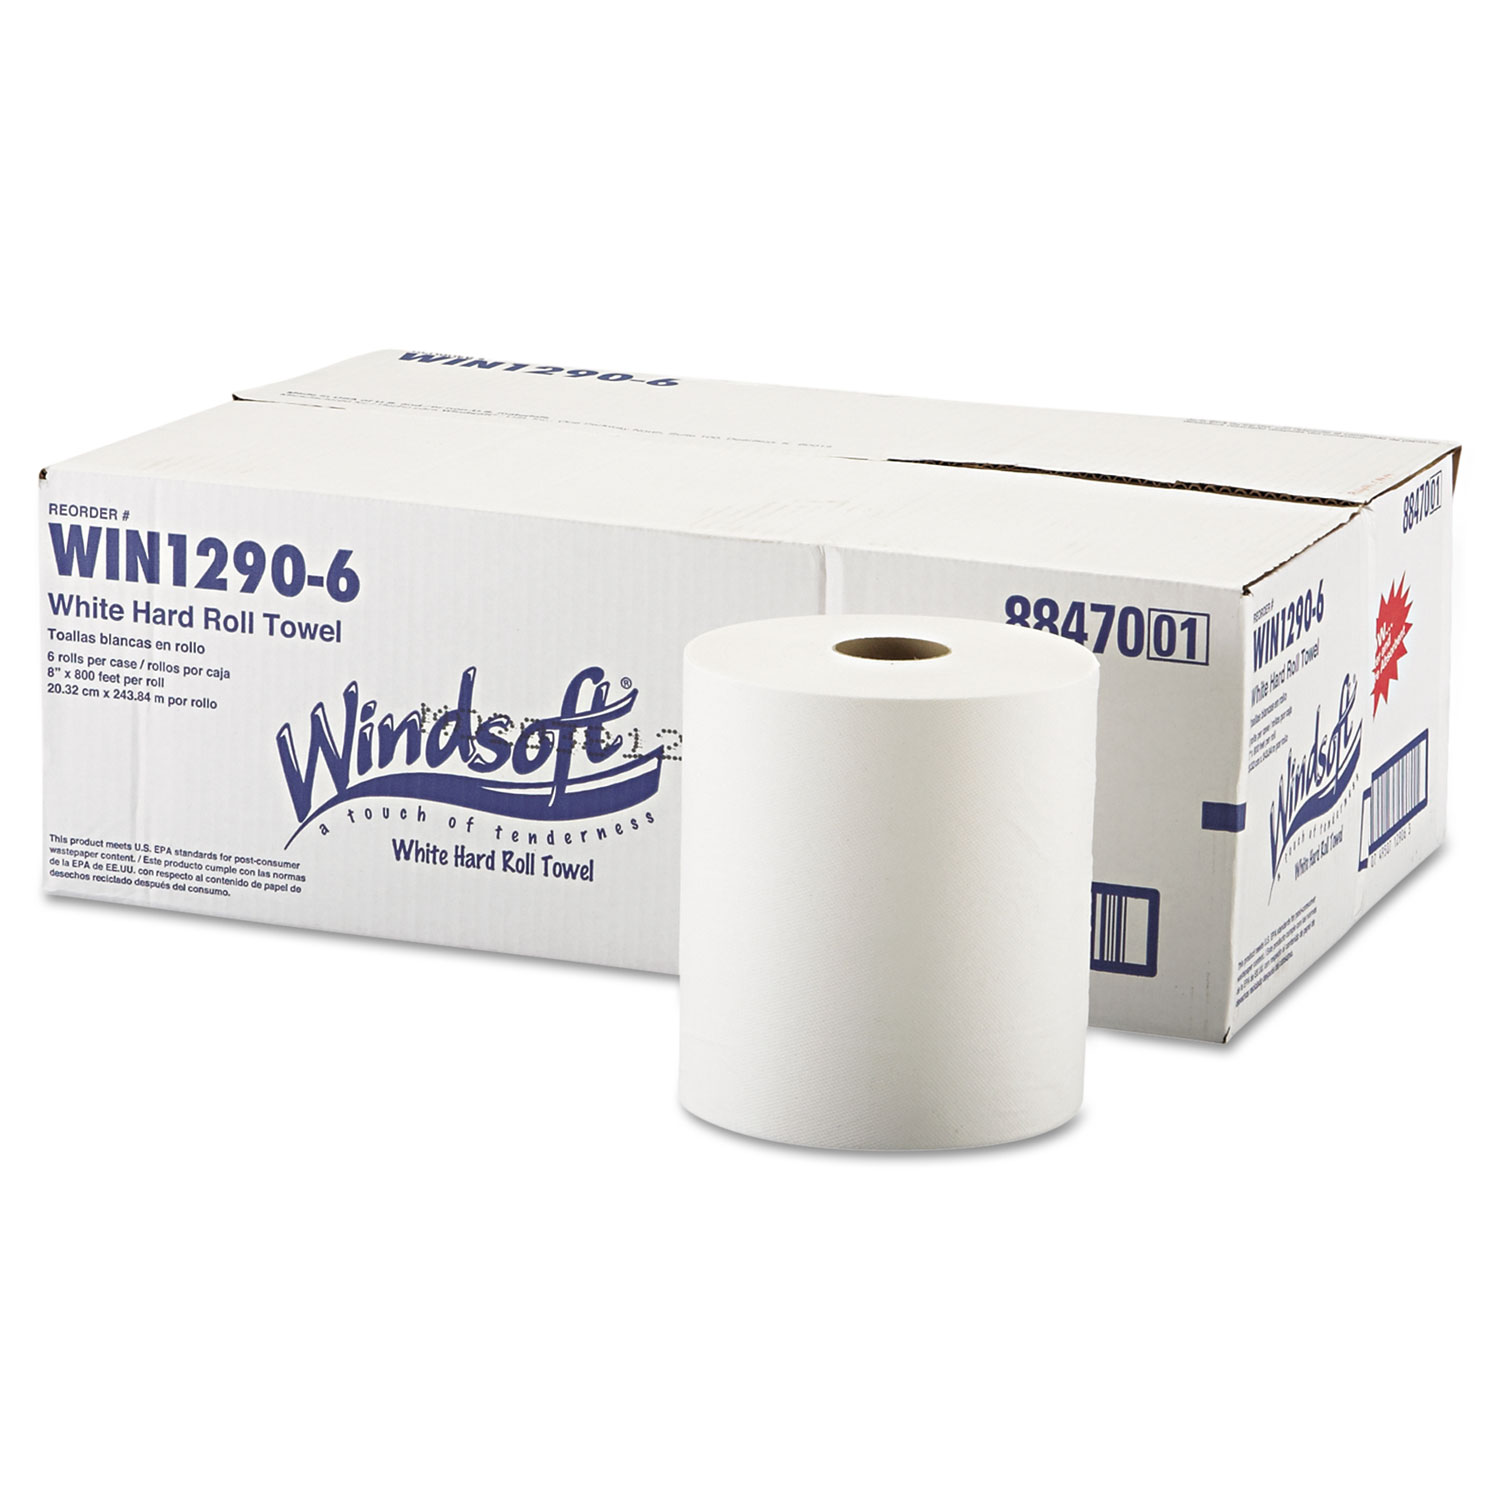 Nonperforated Roll Towels, 1-Ply, White, 8 x 800ft, 6 Rolls/Carton